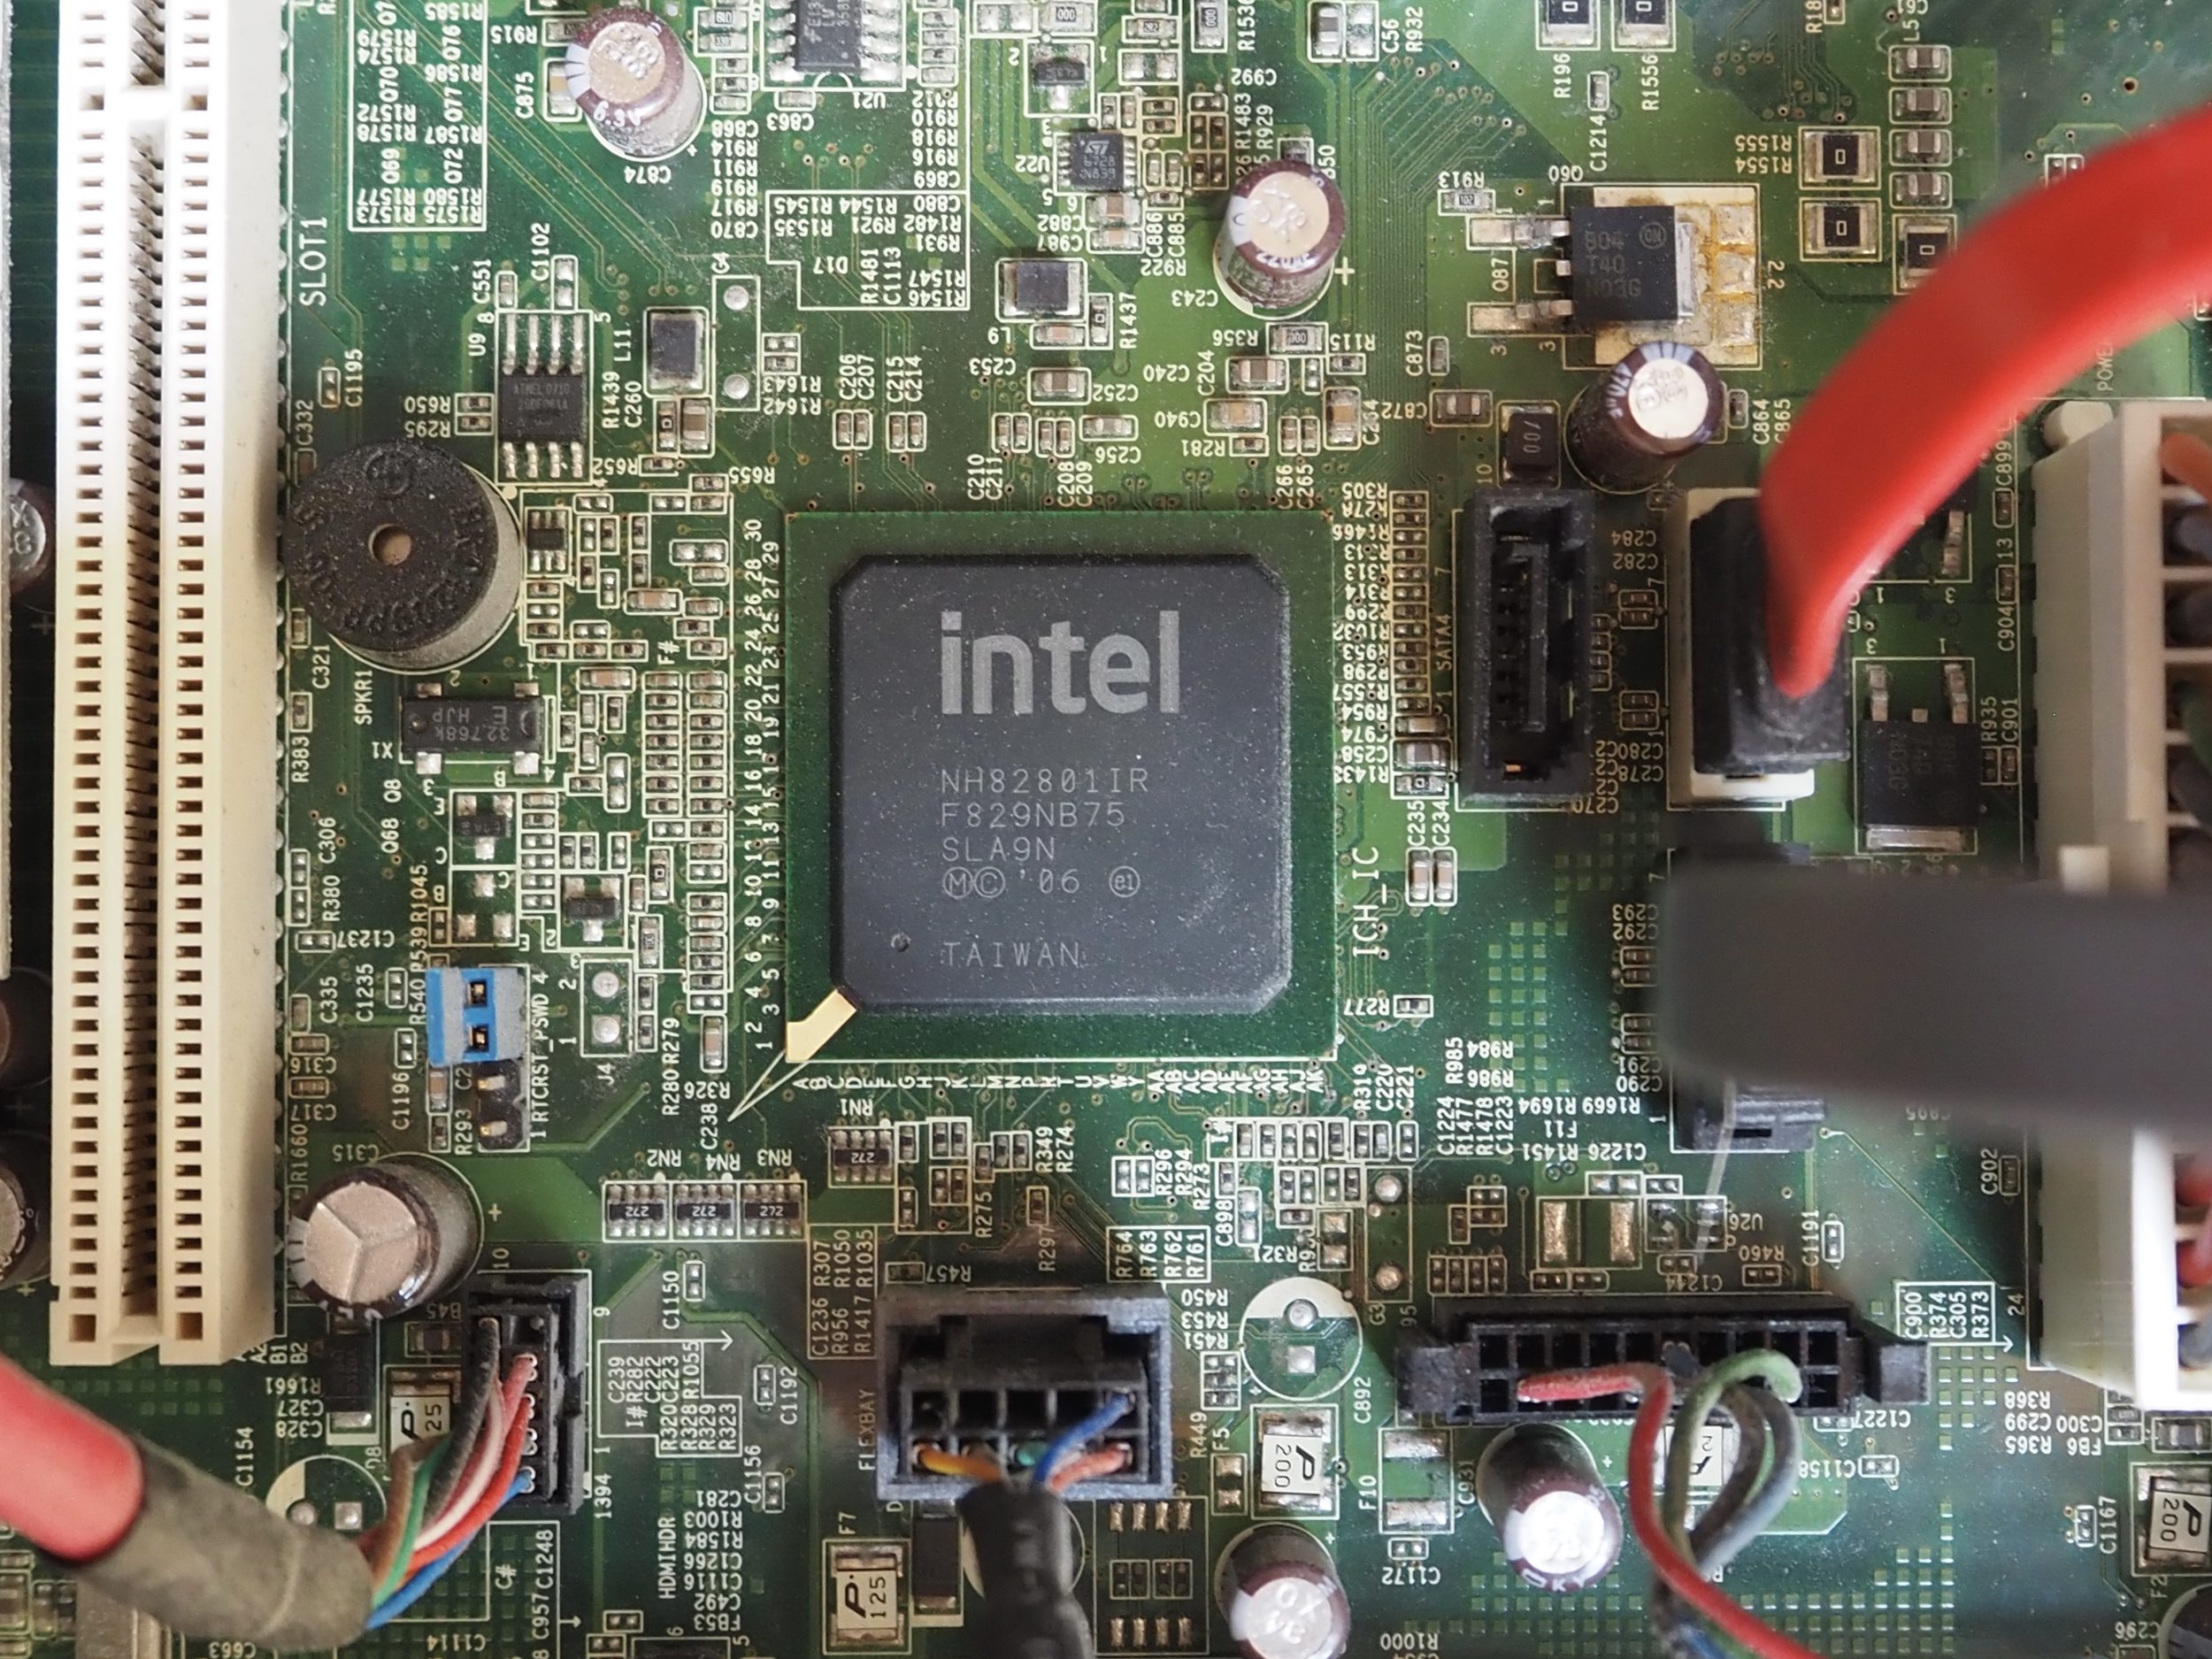 Possible Intel AI silicon CPU Taiwanese microprocessor chip at the center of a motherboard circuitboard.